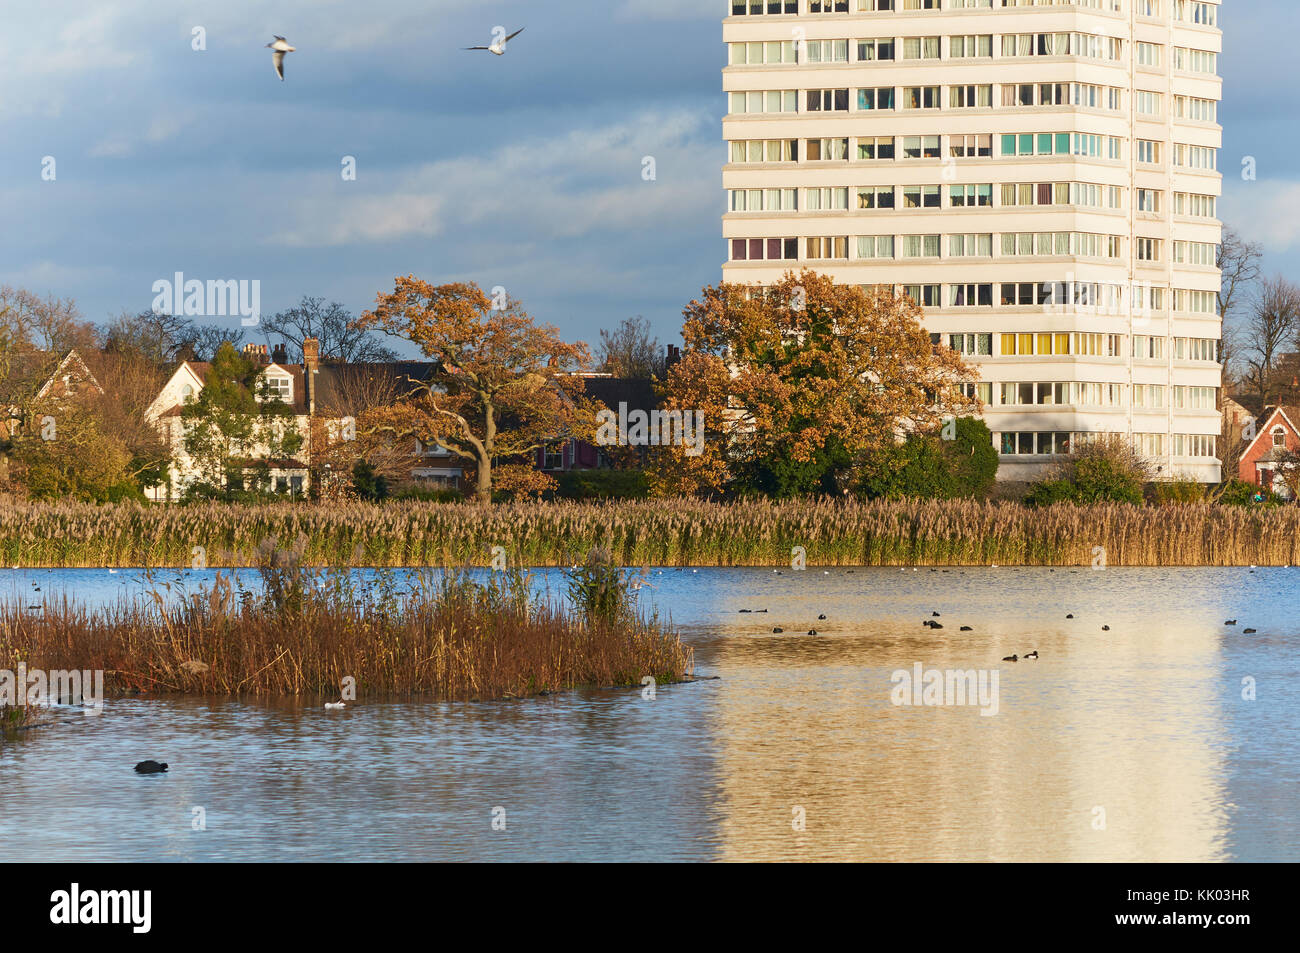 Tower block at Woodberry Down, North London UK, overlooking Woodberry Wetlands Stock Photo